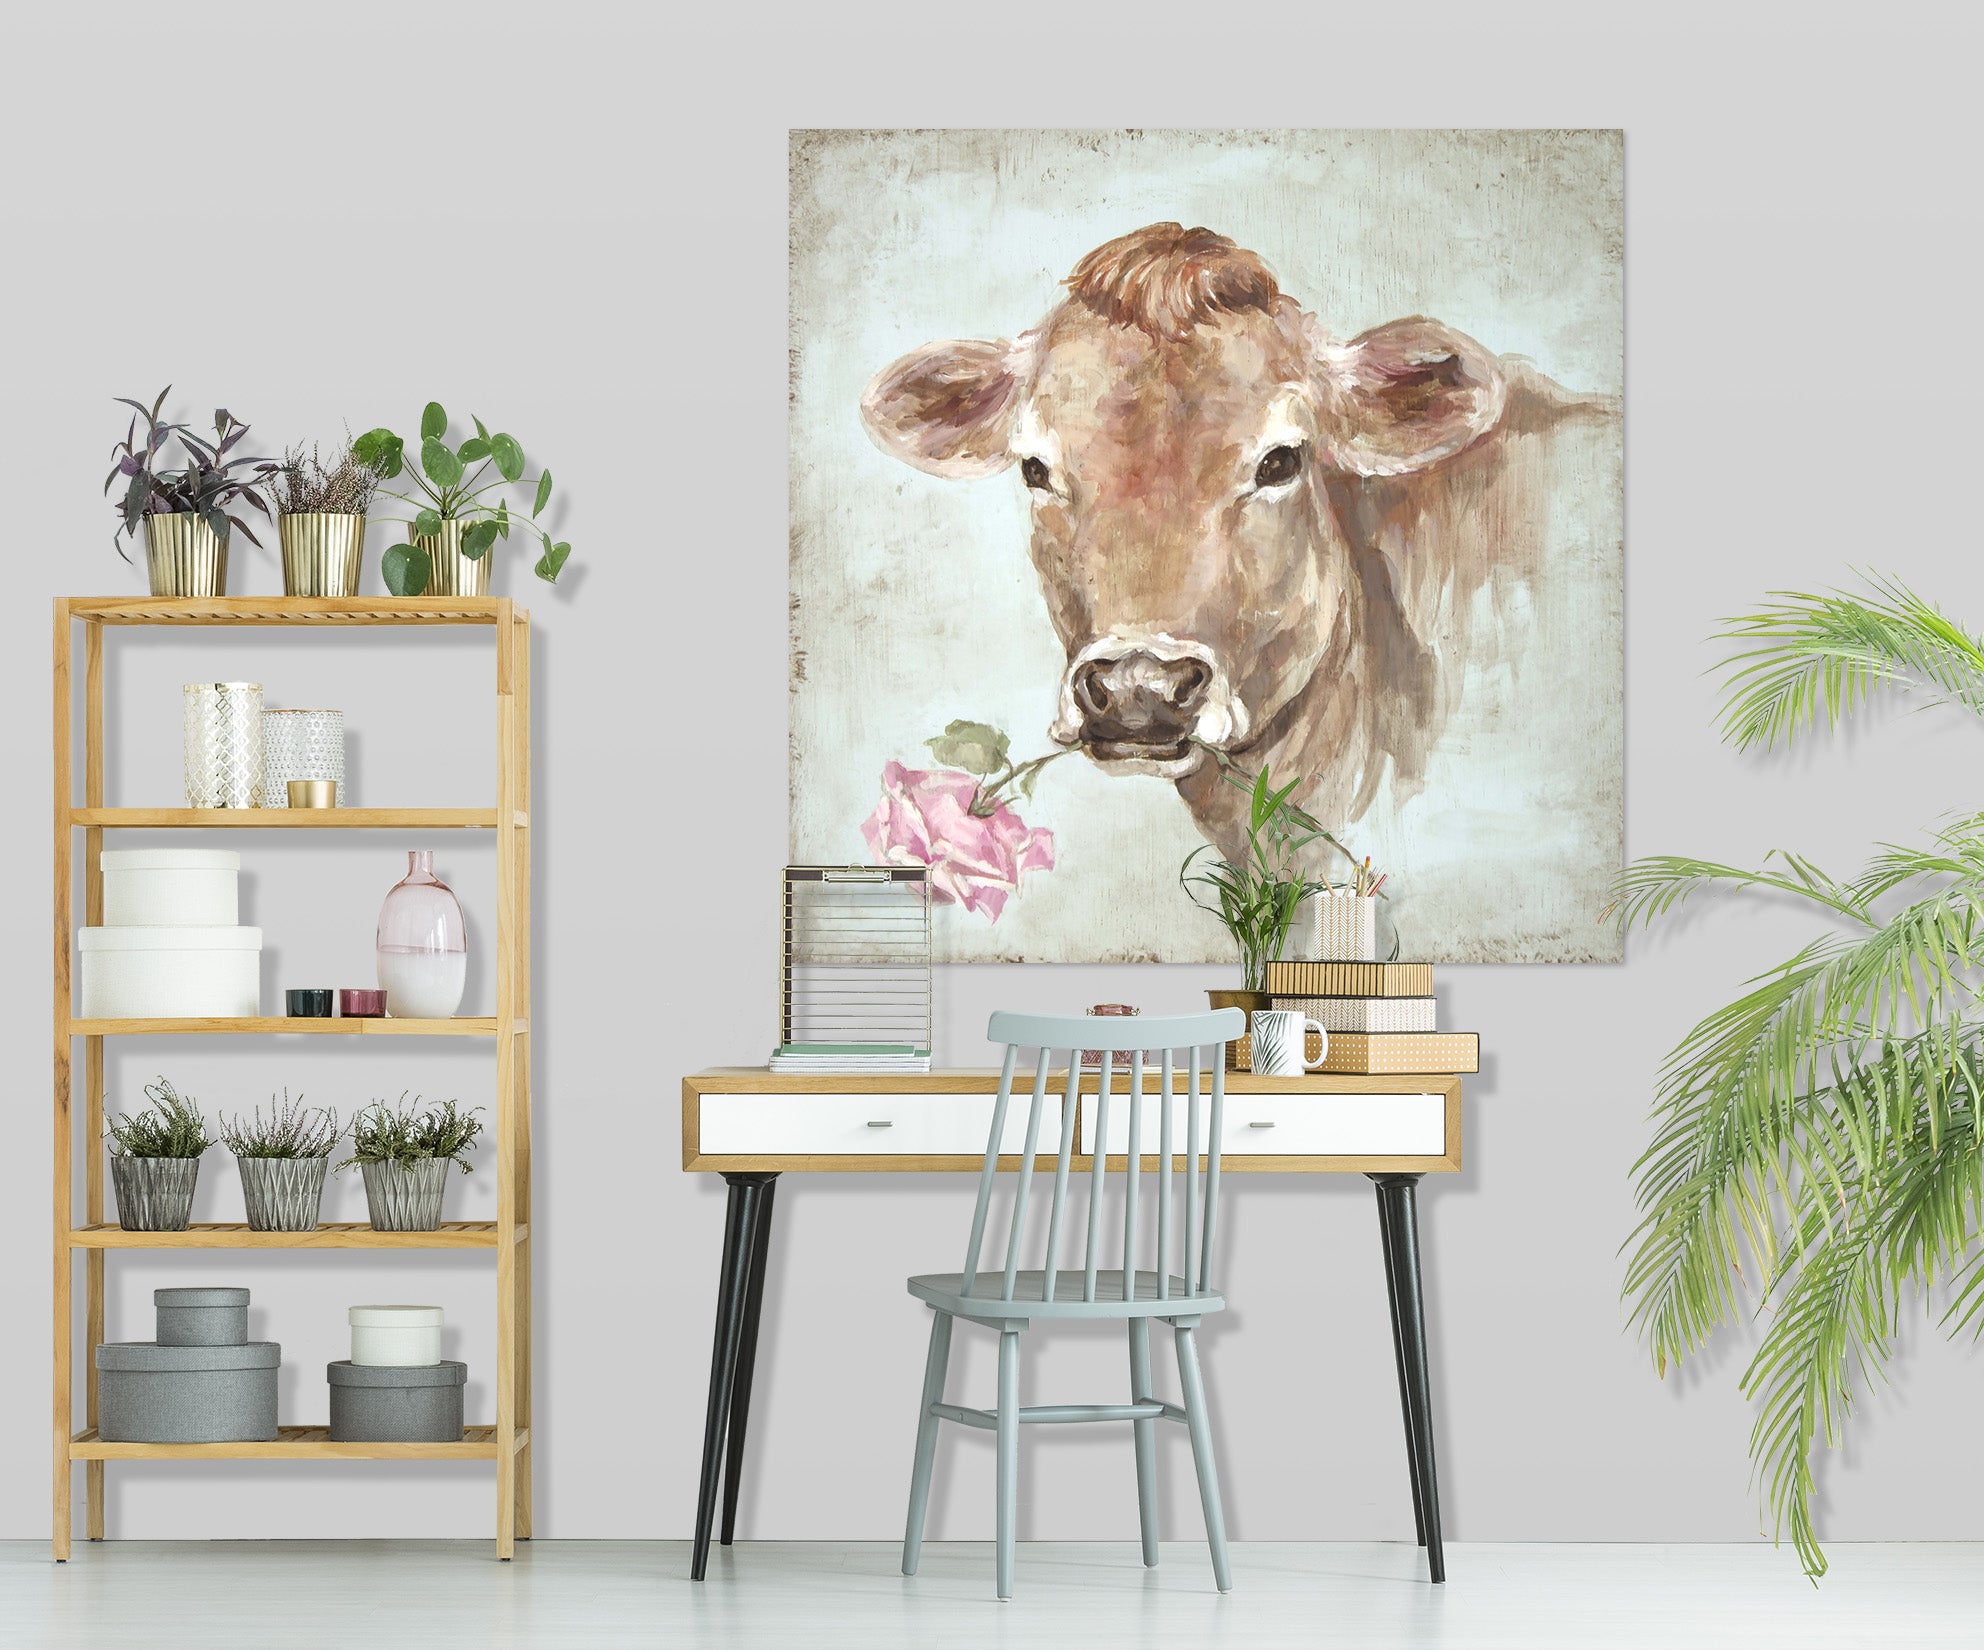 3D Cow Rose 003 Debi Coules Wall Sticker